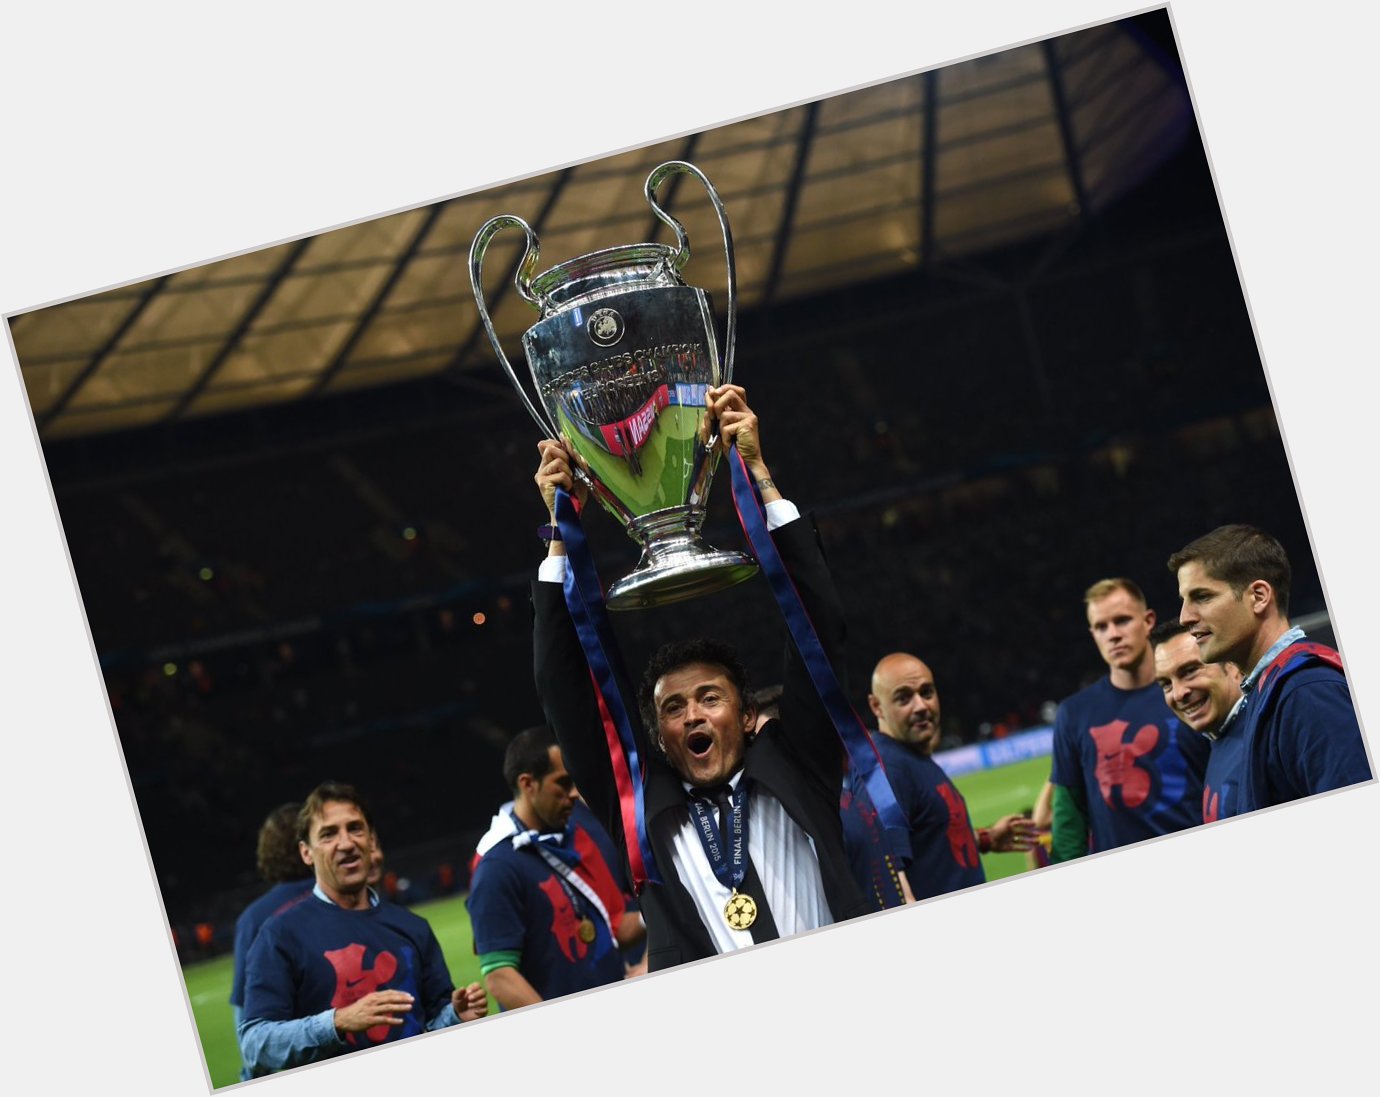 Happy birthday to Barcelona coach Luis Enrique who turns 47 today! 

He won the treble in 2015 